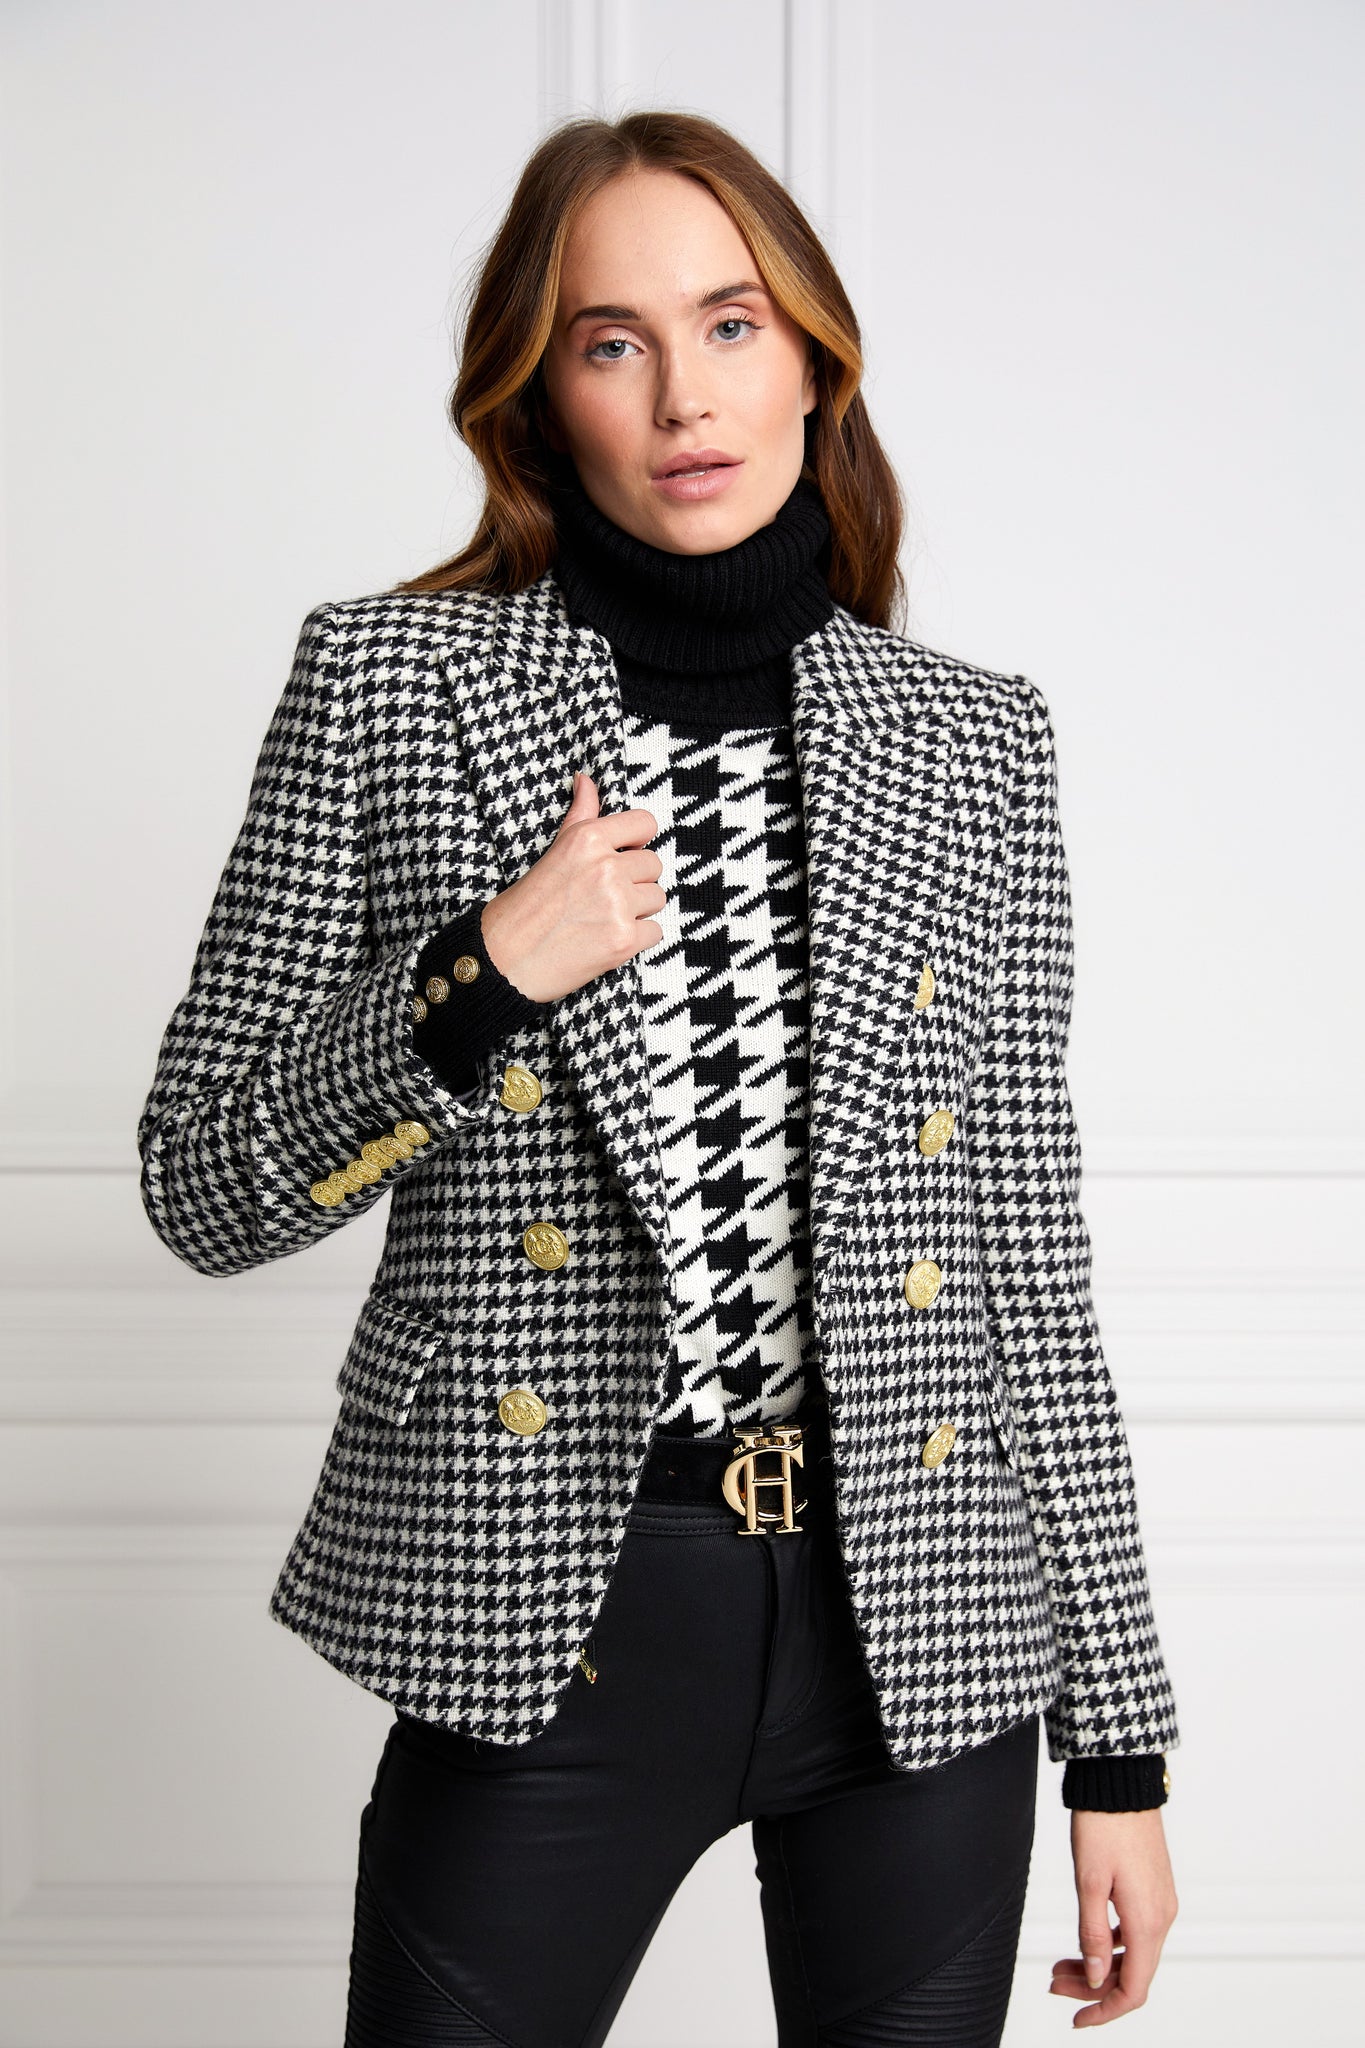 British made double breasted blazer that fastens with a single button hole to create a more form fitting silhouette with two pockets and gold button detailing this blazer in black and white houndstooth